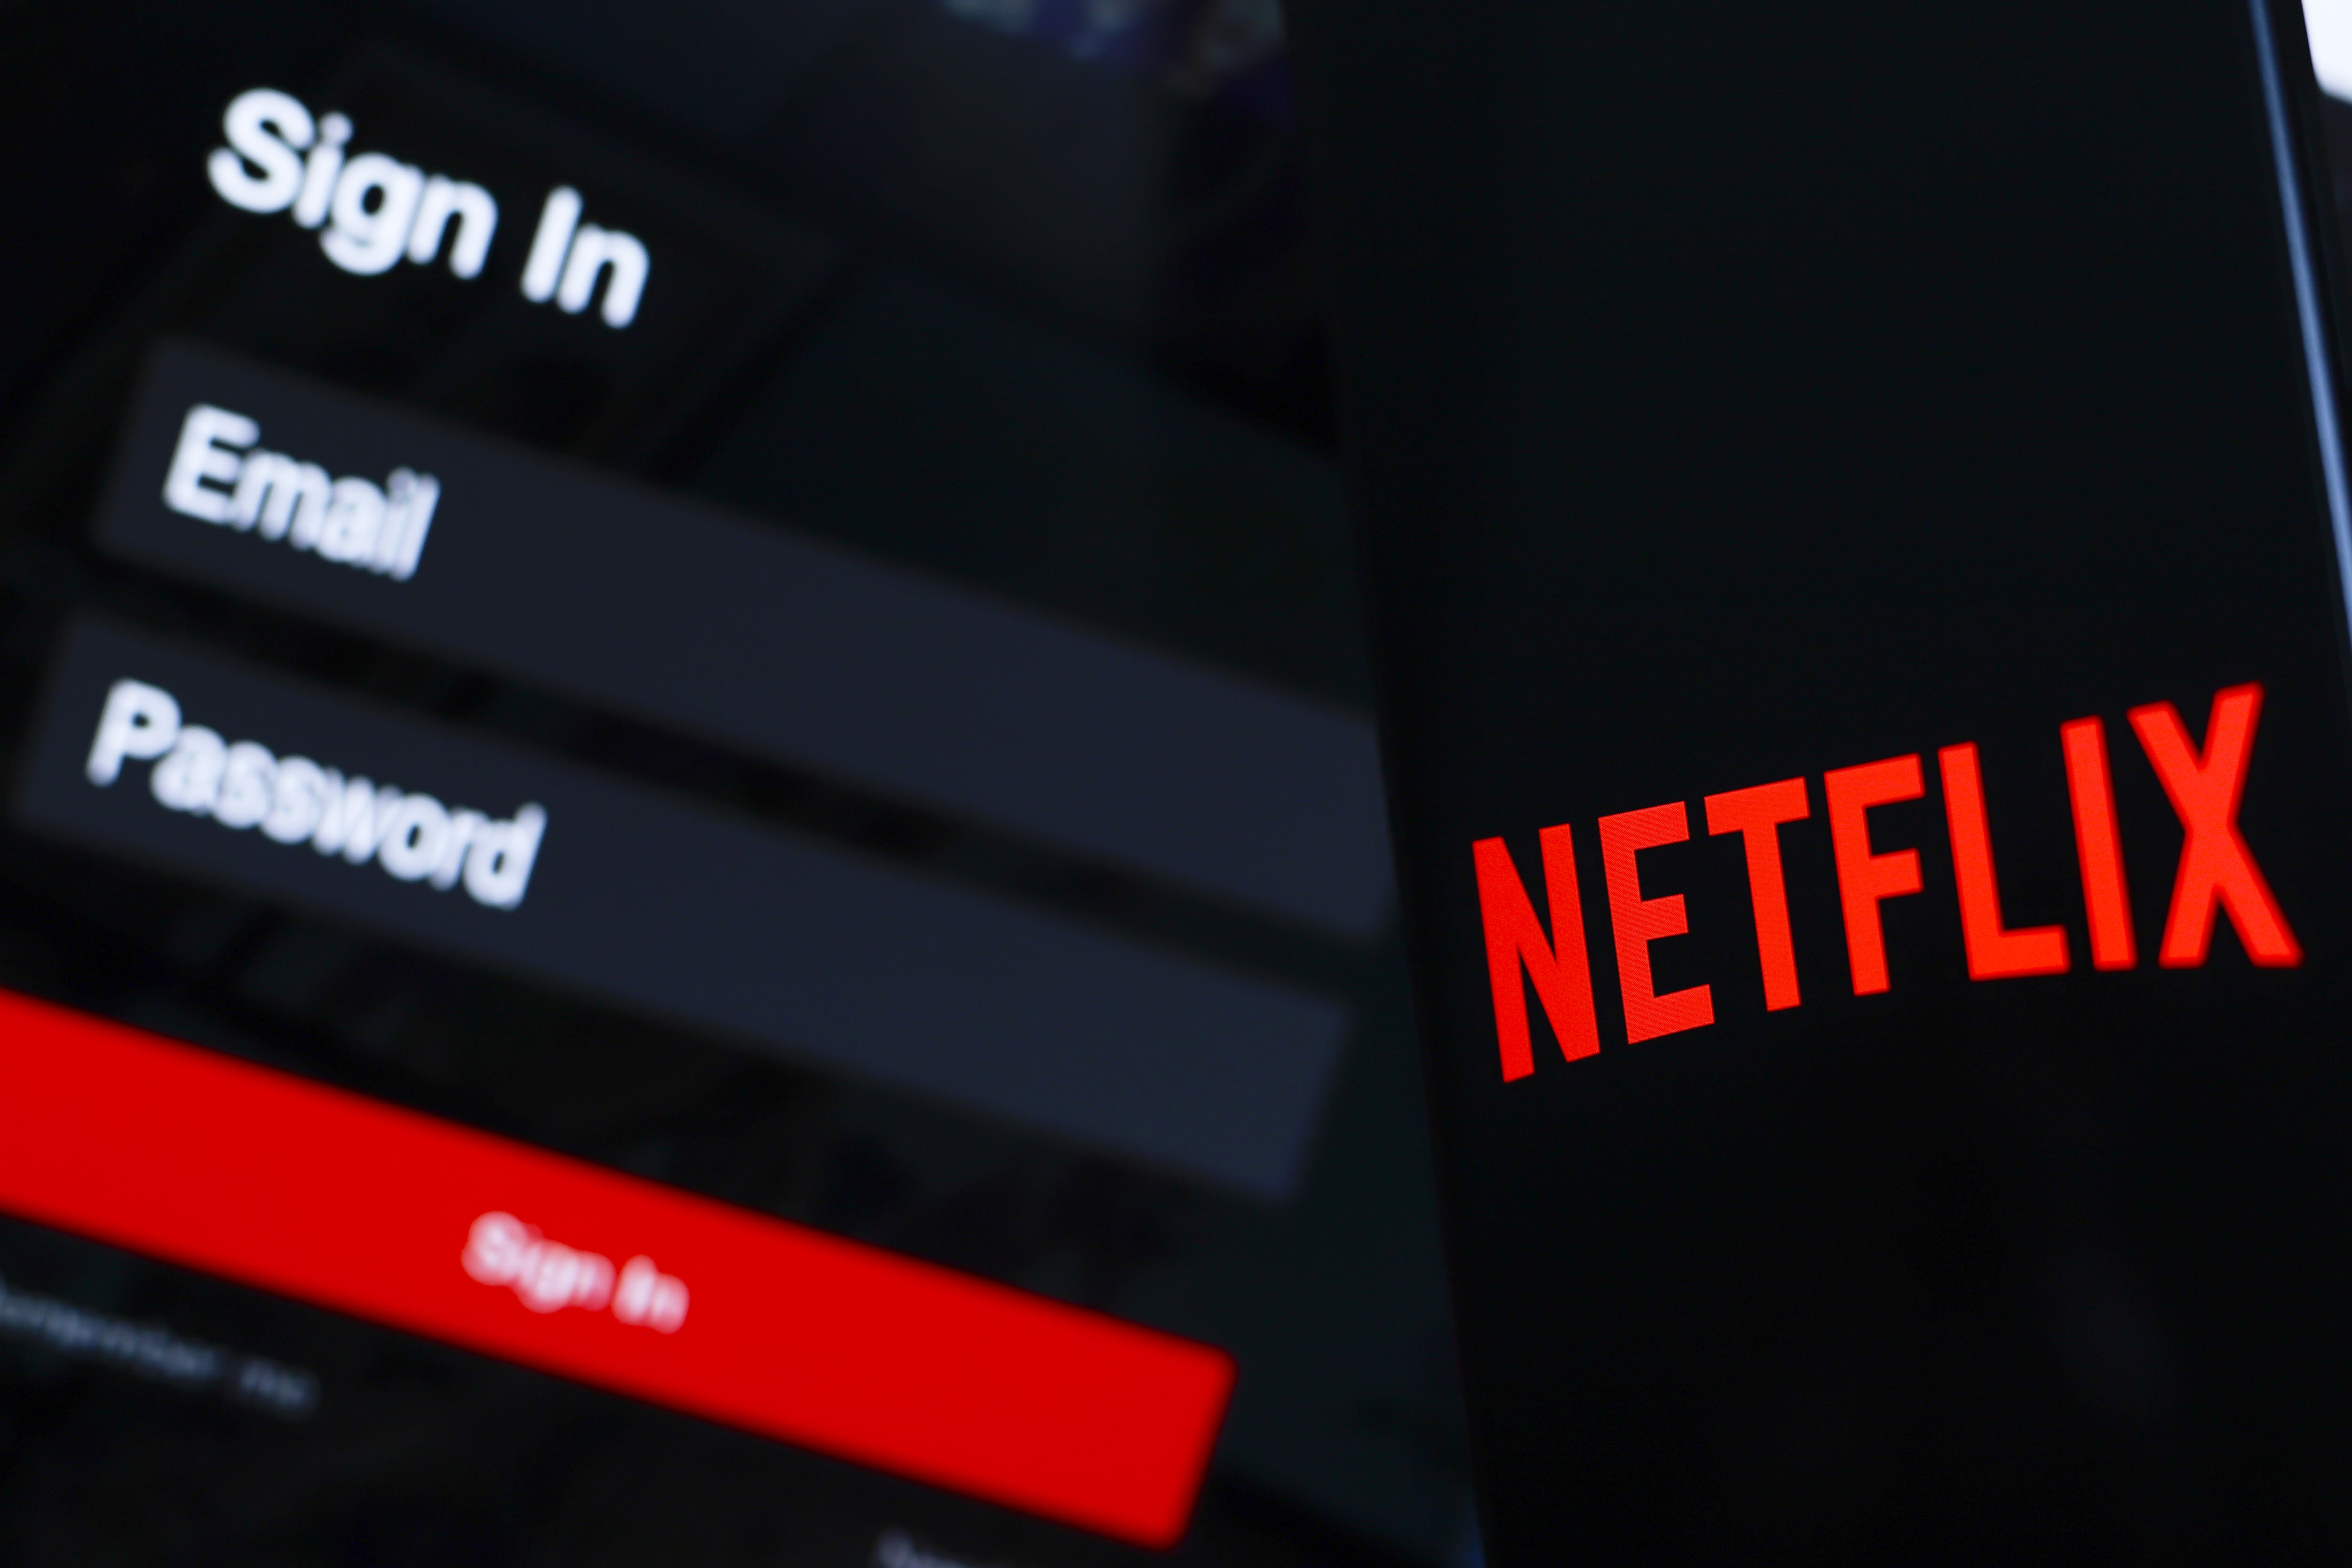 Netflix earnings preview: Investor expectations high as stock flirts with records